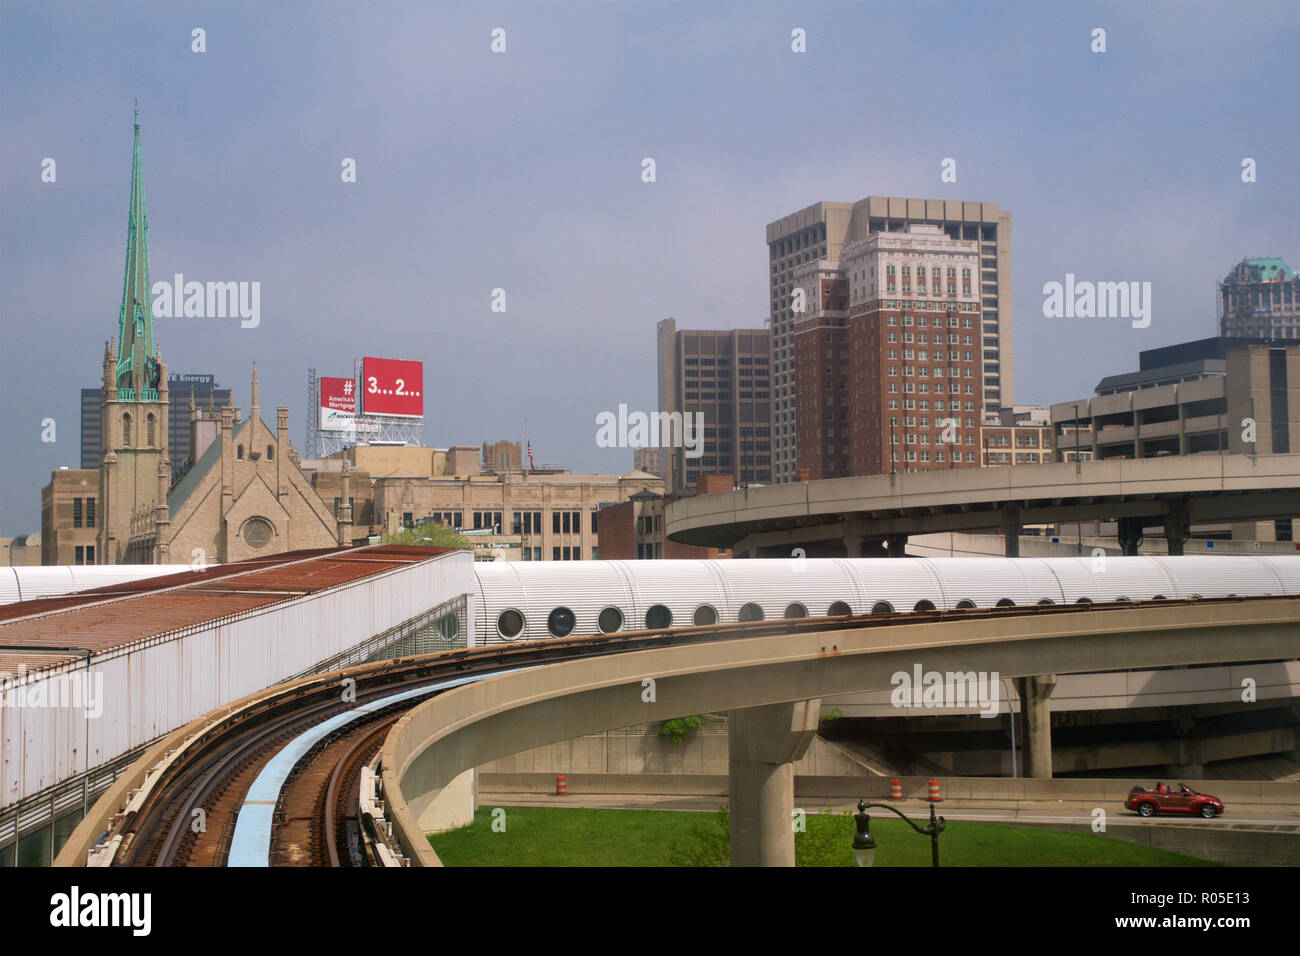 DETROIT, MICHIGAN, UNITED STATES - MAY 22nd, 2018: Riding the 'Detroit People Mover' Tramway in Detroit Downtown. The elevated monorail is one of many public modes of transportation in the city Stock Photo